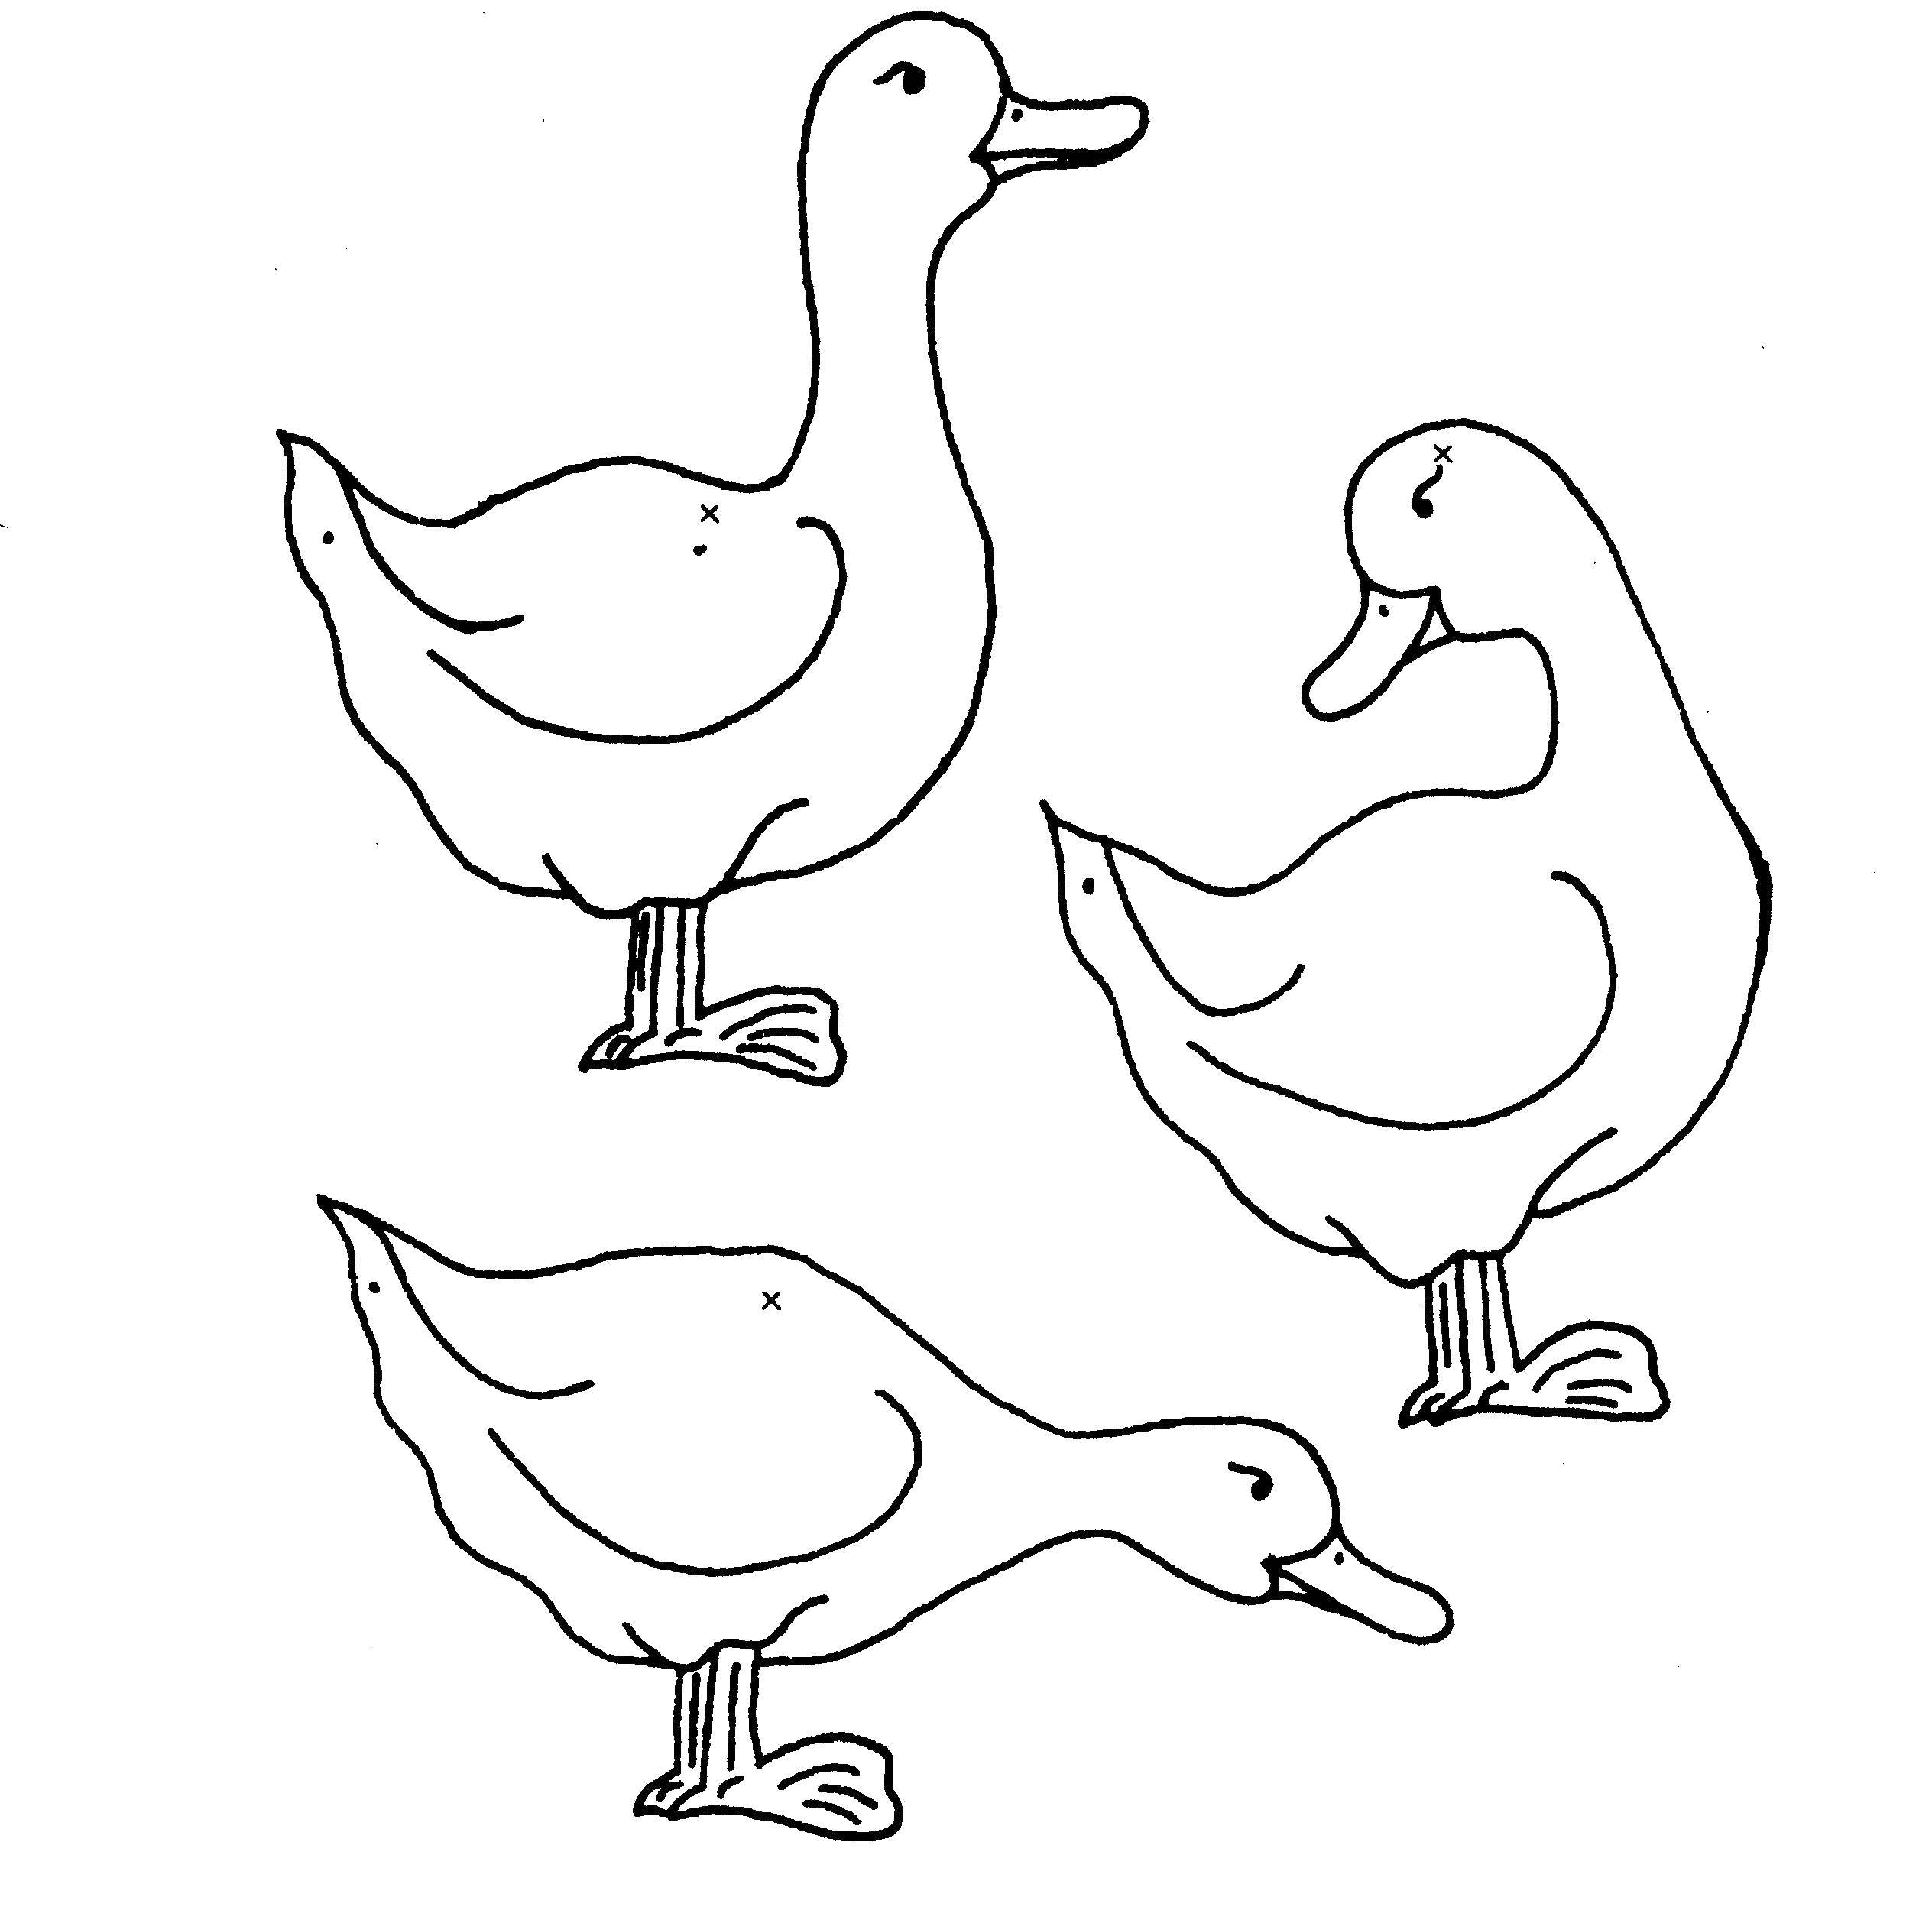 Coloring Geese. Category birds. Tags:  Birds, goose.